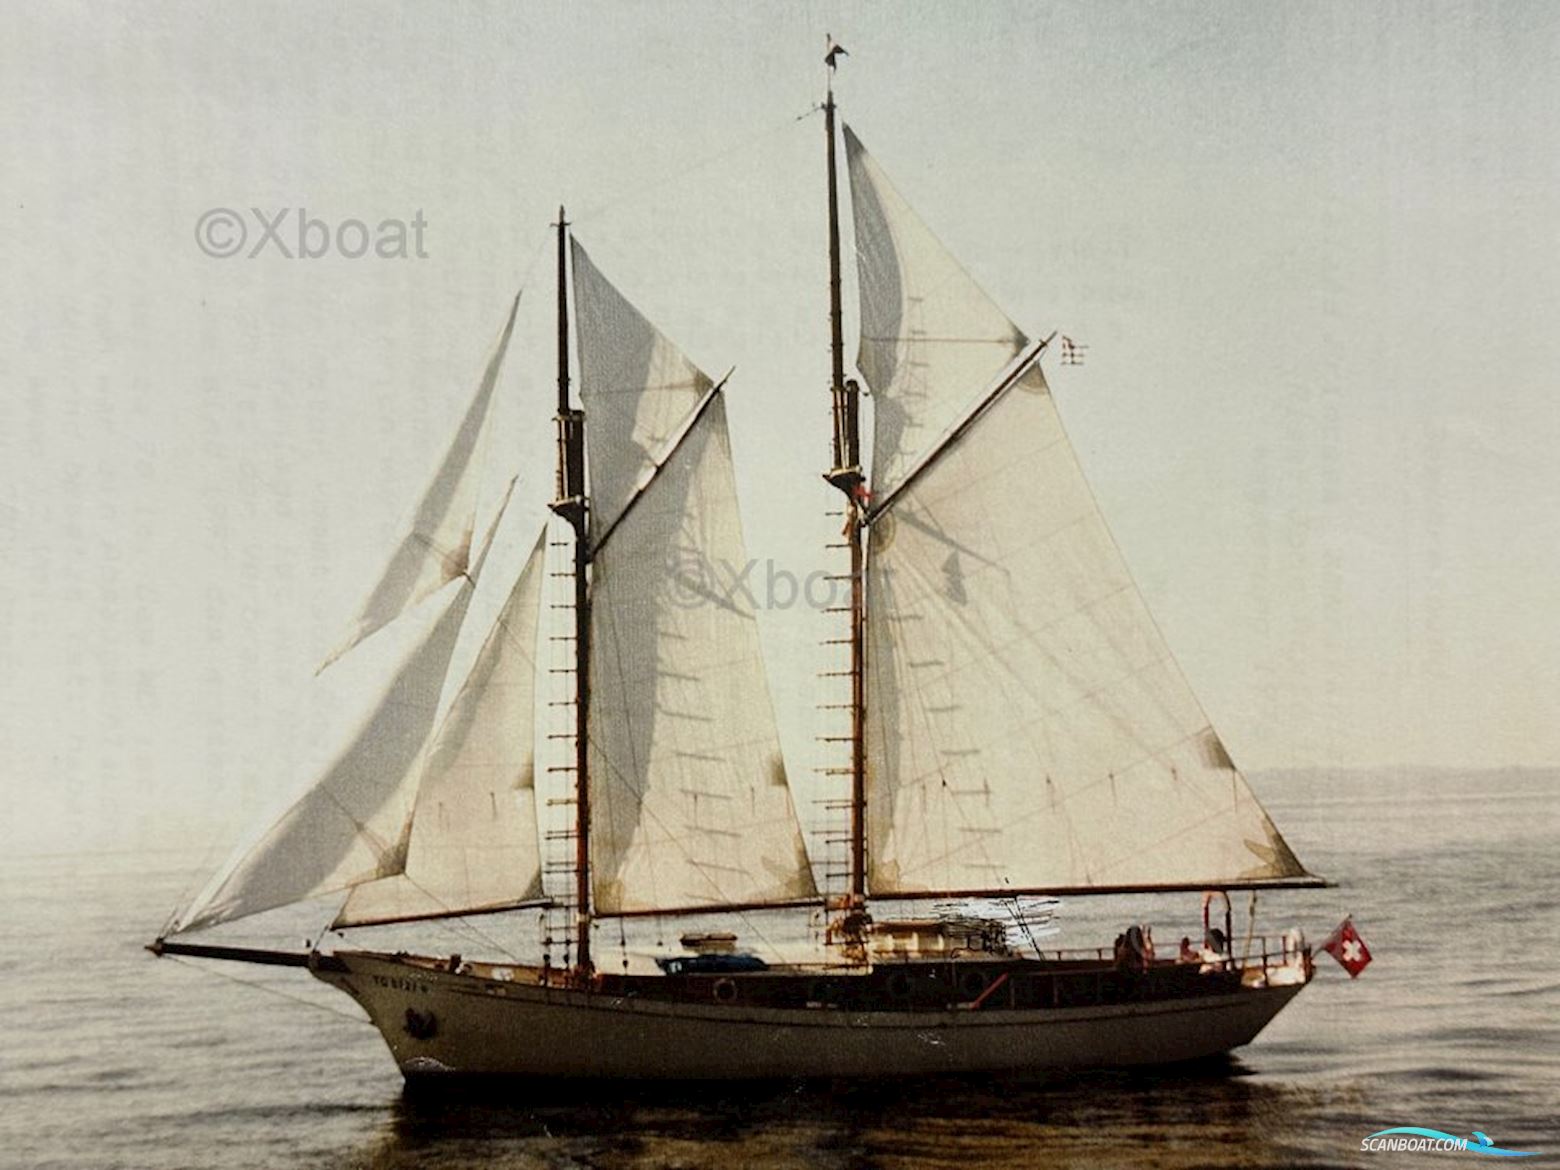 Hasler Island-Princess 44 American Schooner Sailing boat 1976, with Coventry Victor engine, France